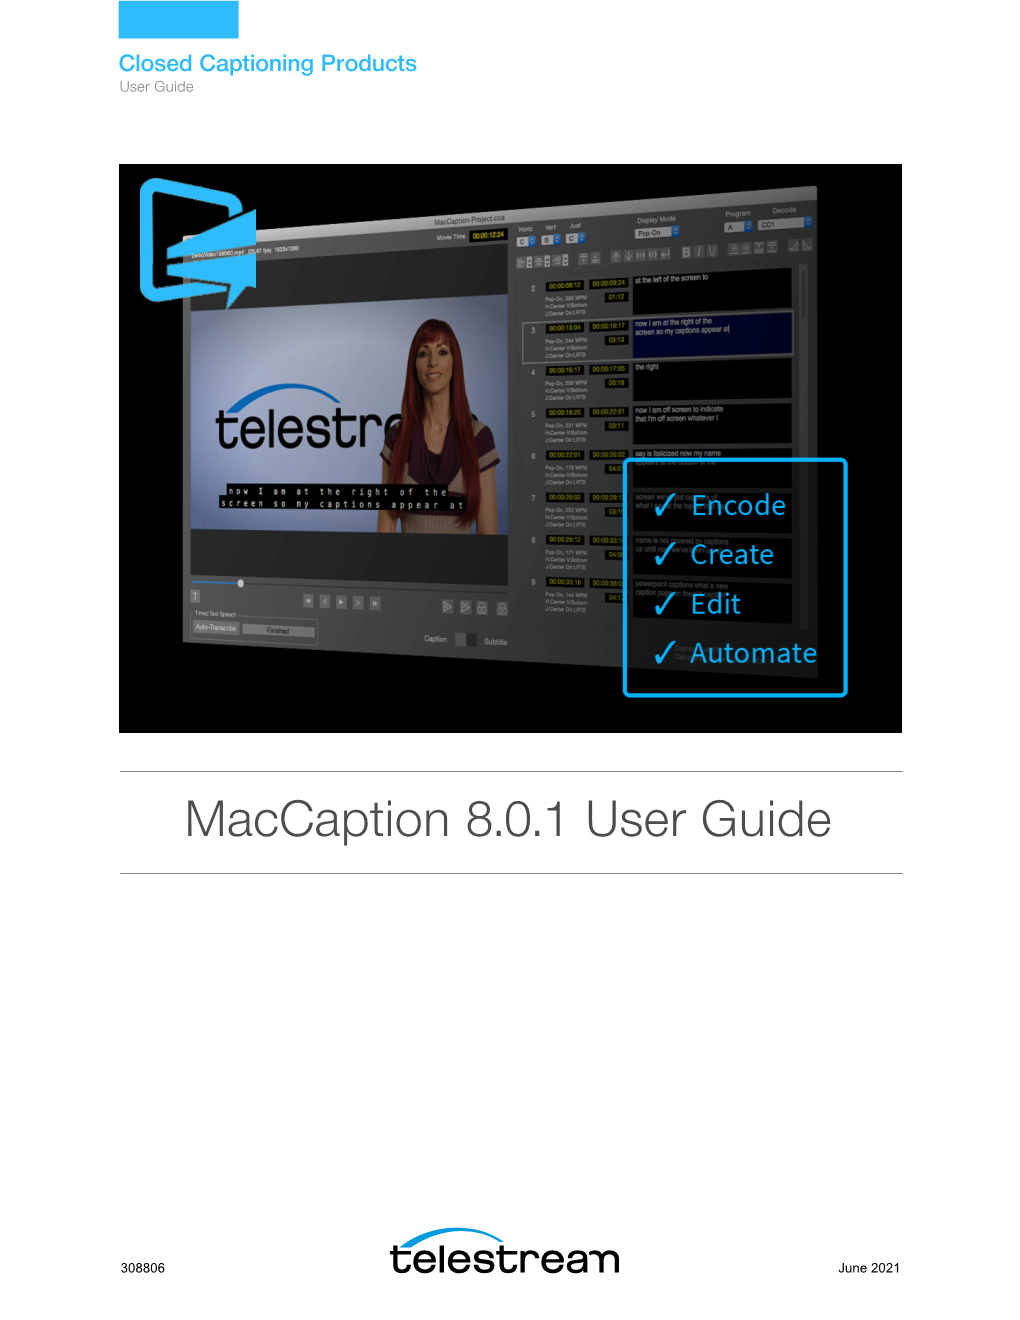 Maccaption 8.0.1 User Guide